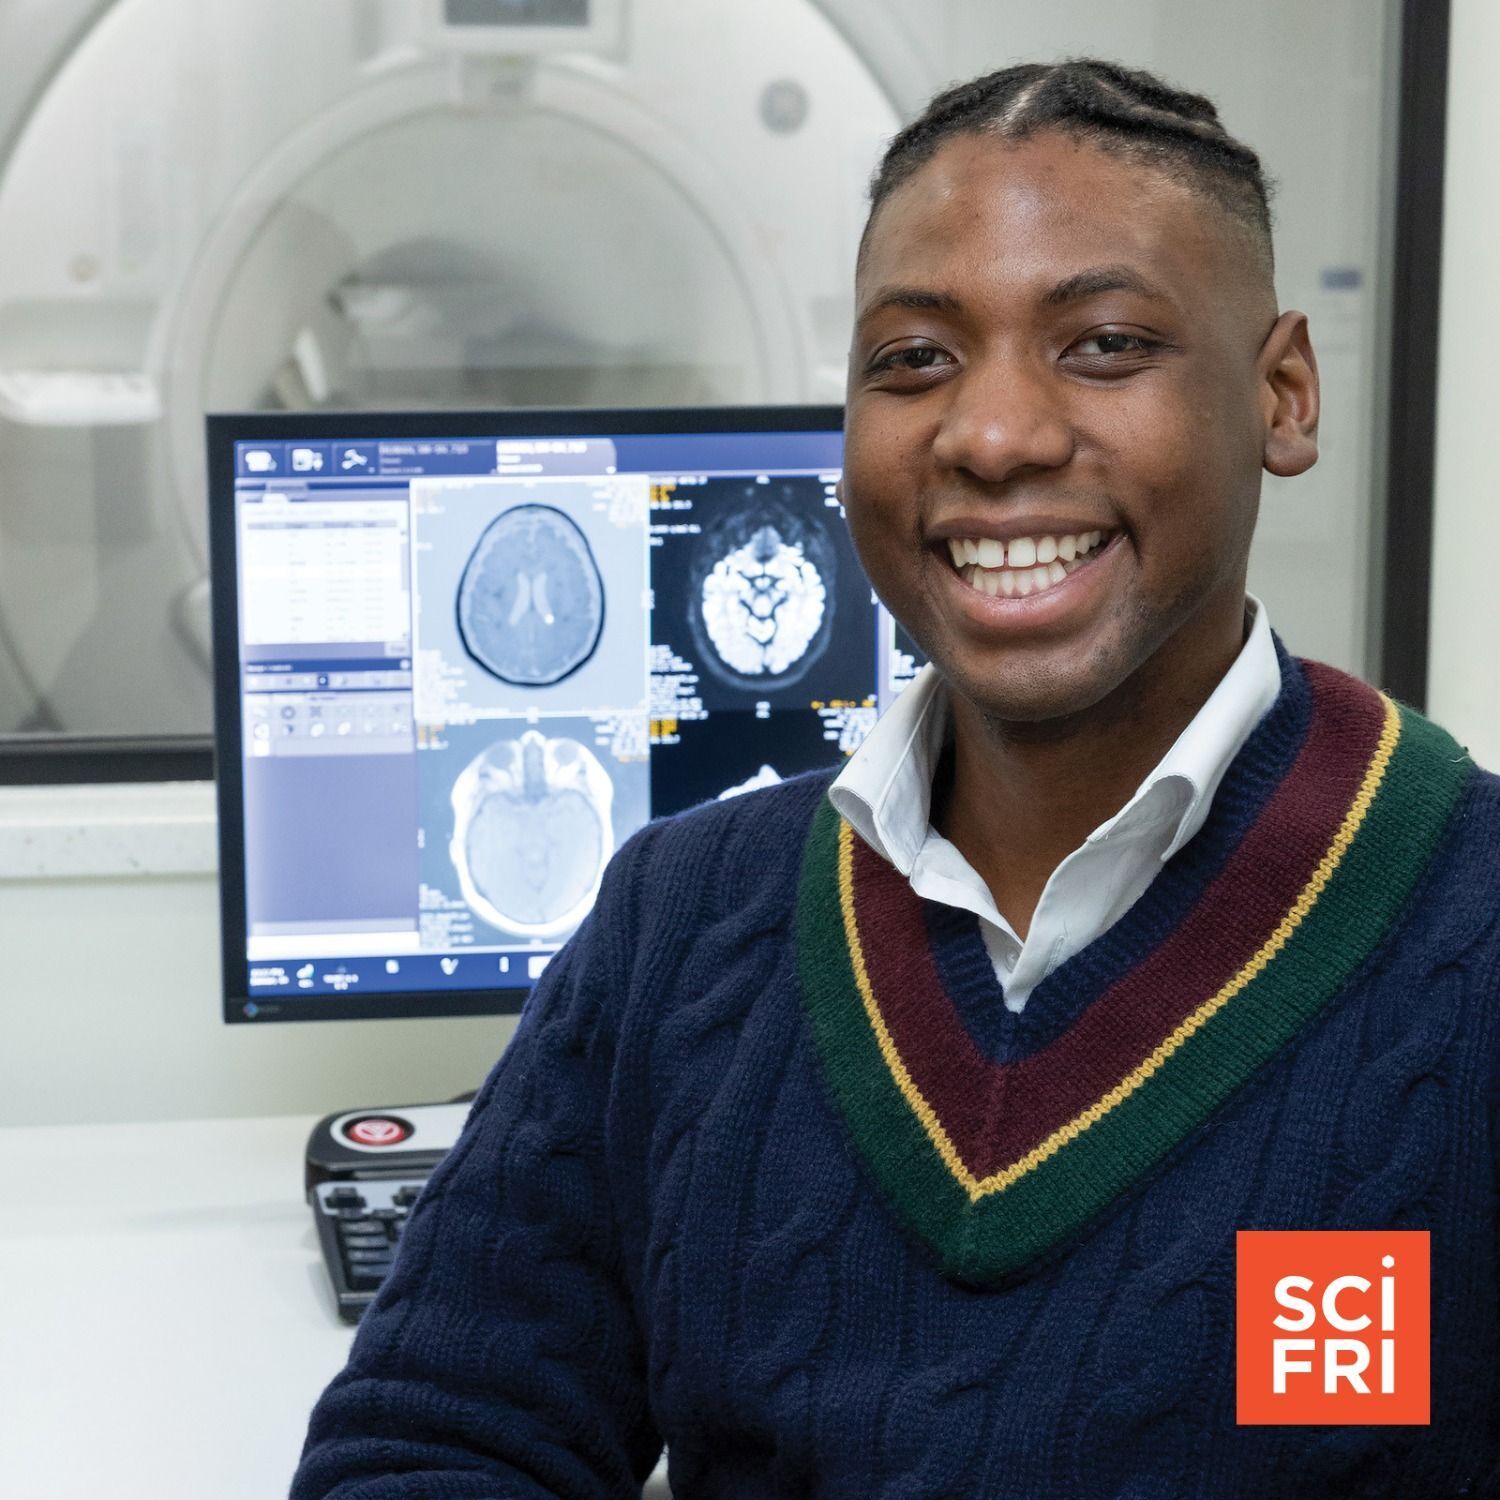 722: A Young Scientist Uplifts The Needs Of Parkinson’s Patients